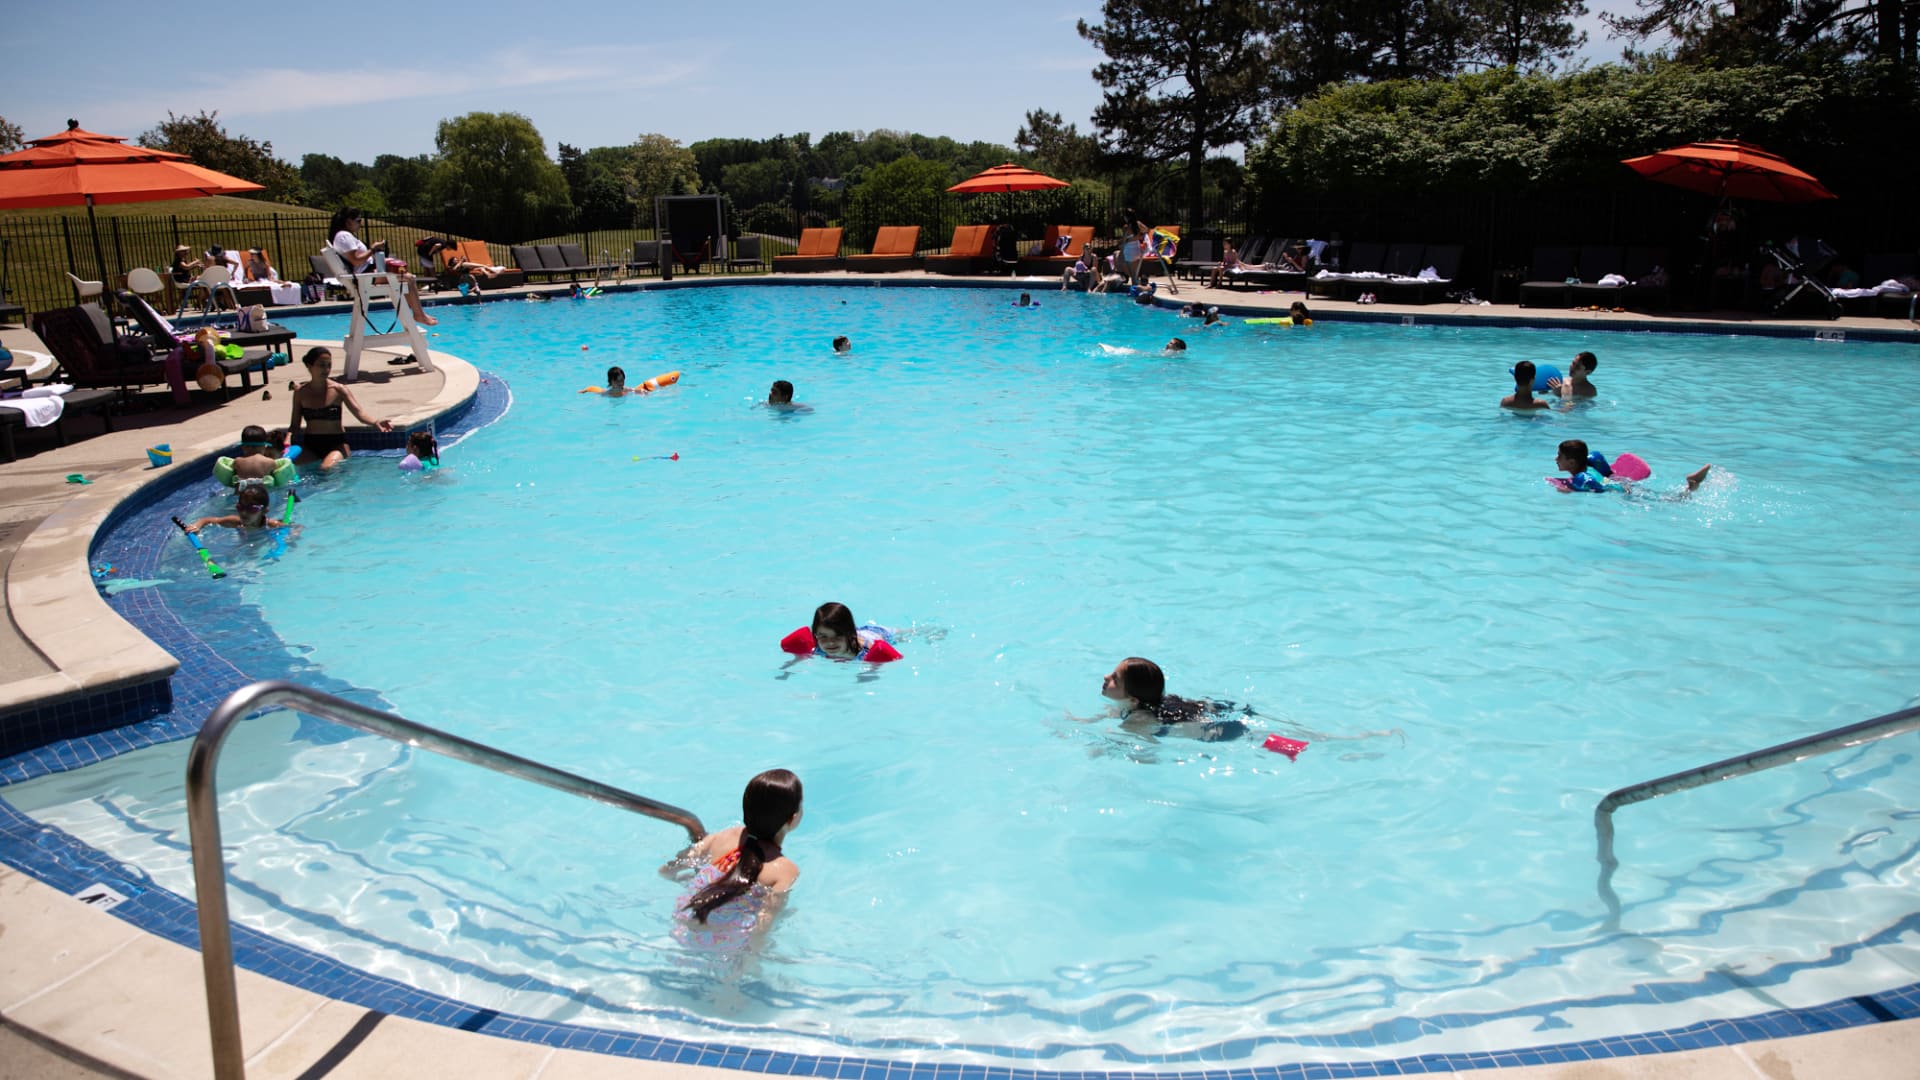 People swim in a pool at a country club in Bloomfield Hills Township, Michigan, U.S., on Monday, June 8, 2020.